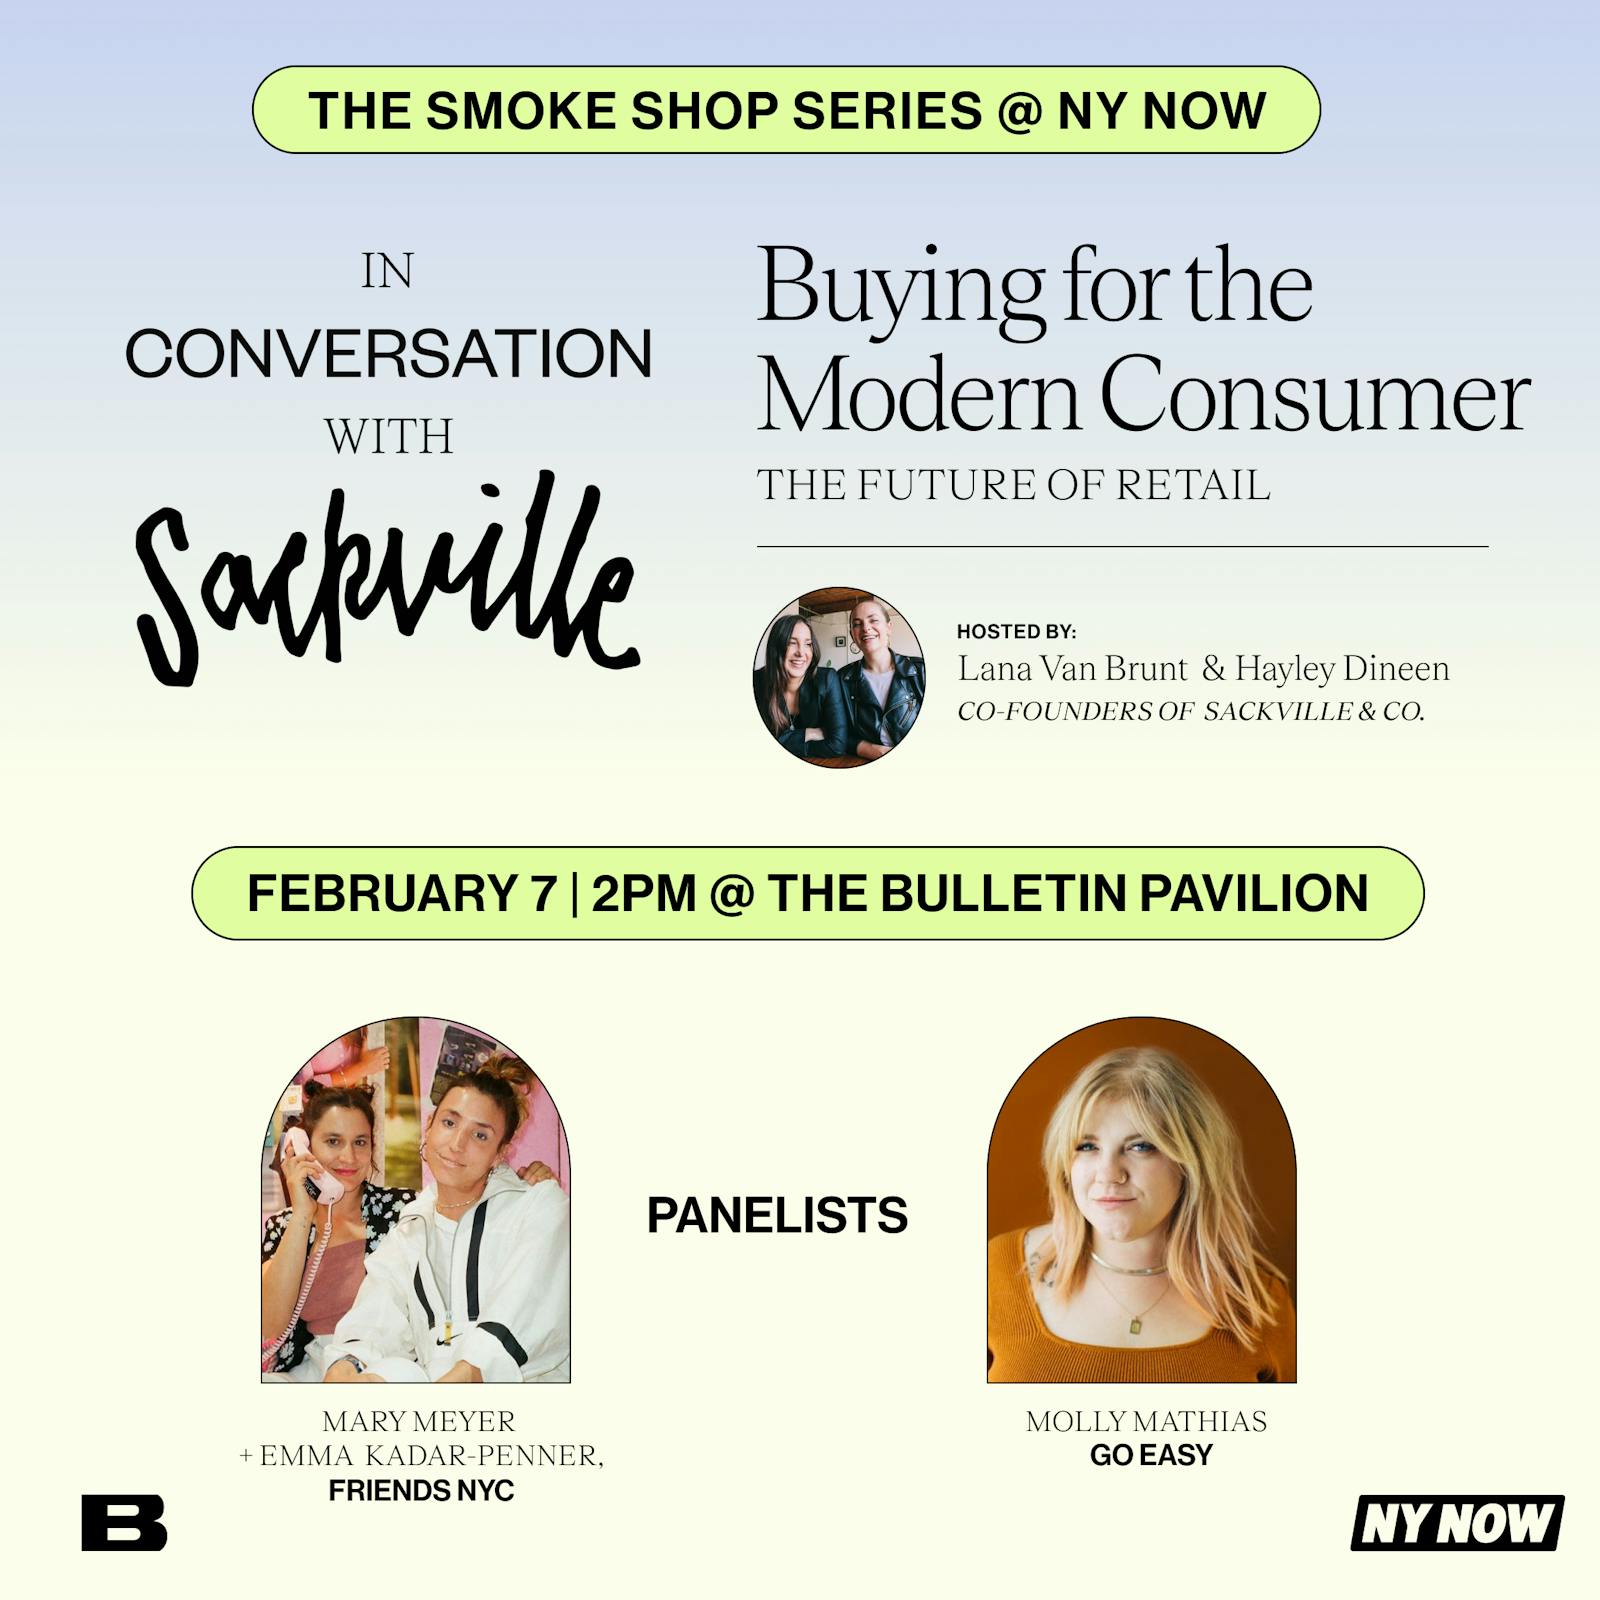 "Buying for a Modern Consumer" with Mary & Emma (Friends NYC) + Molly Mathias (Go Easy) – The Smoke Shop Series @ NY NOW